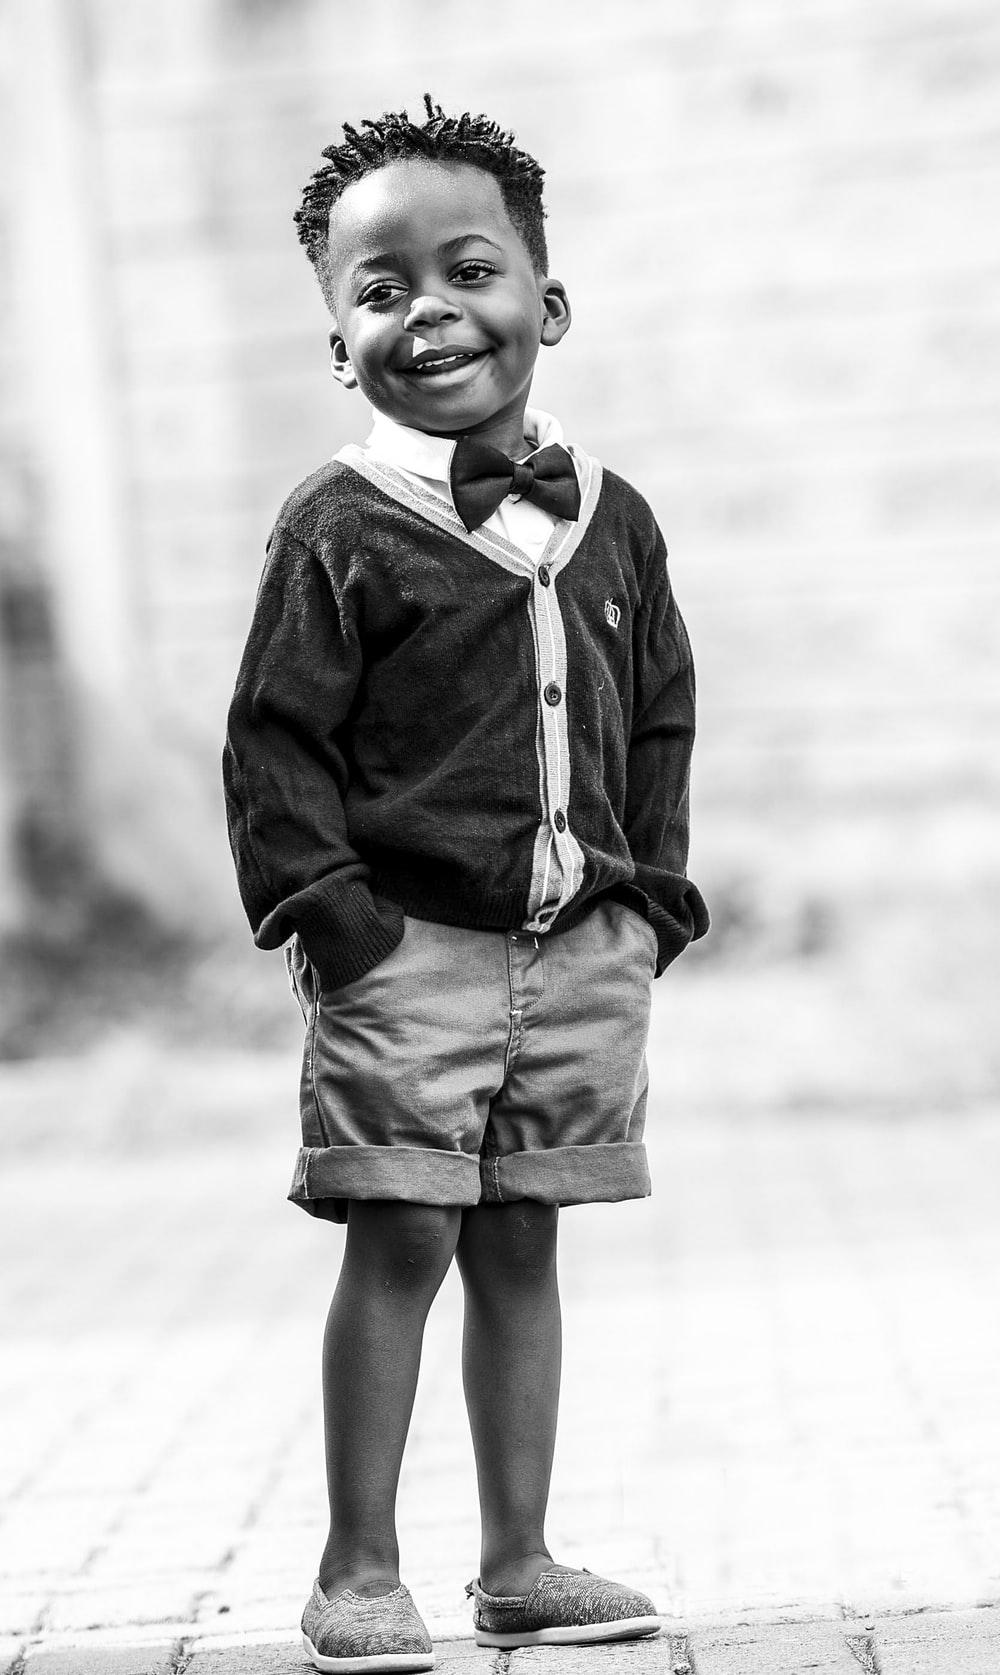 African American Kids Picture. Download Free Image